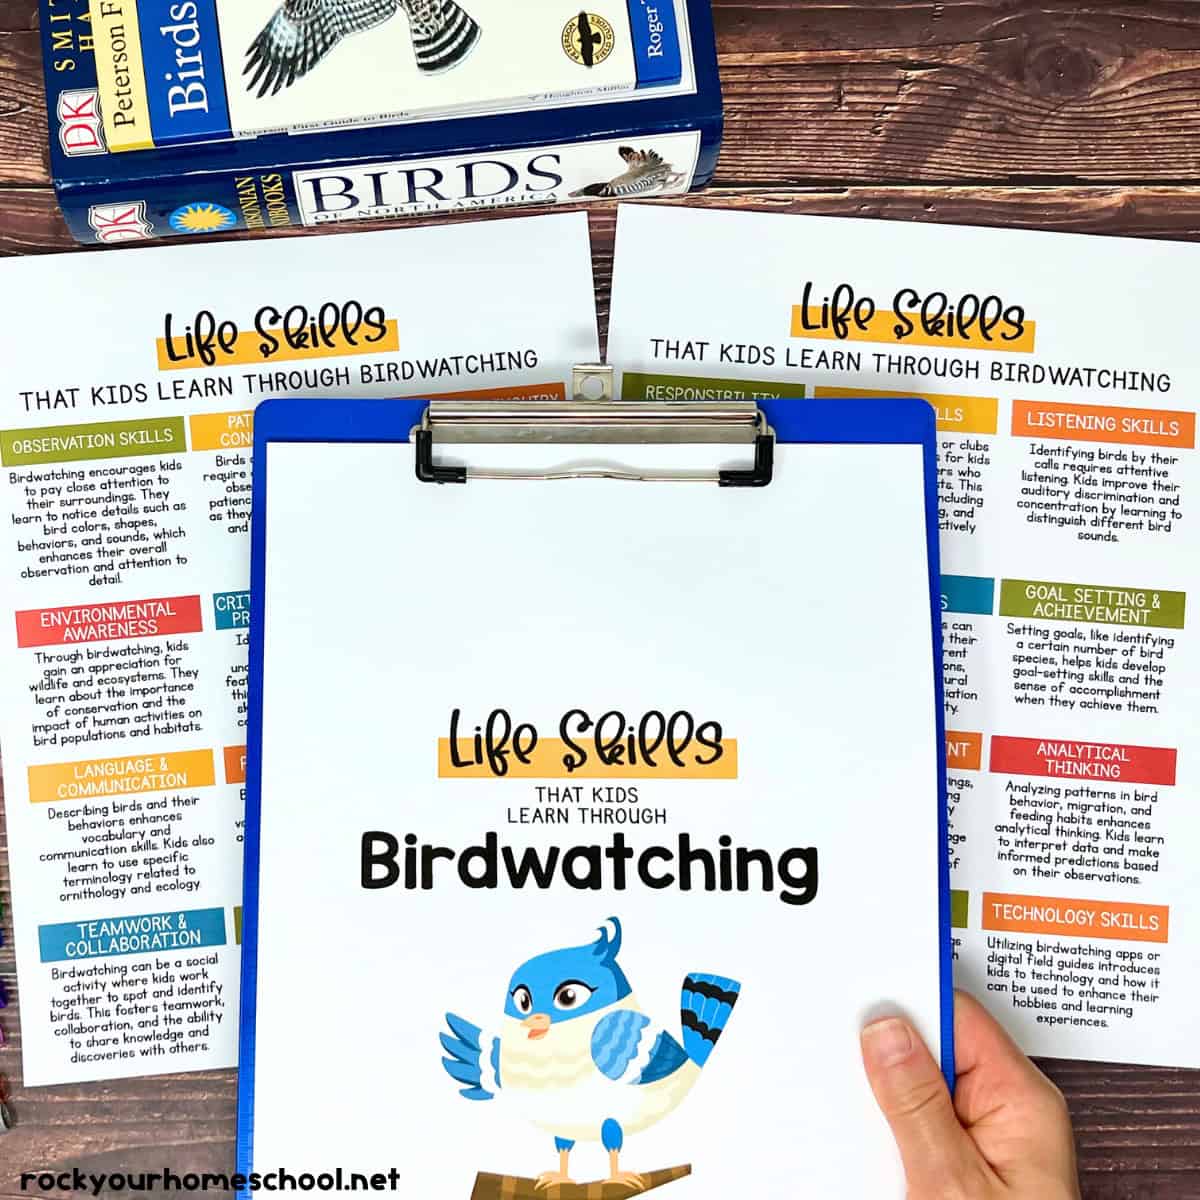 Birdwatching For Kids: 24 Brilliant Benefits and Life Skills (Free)